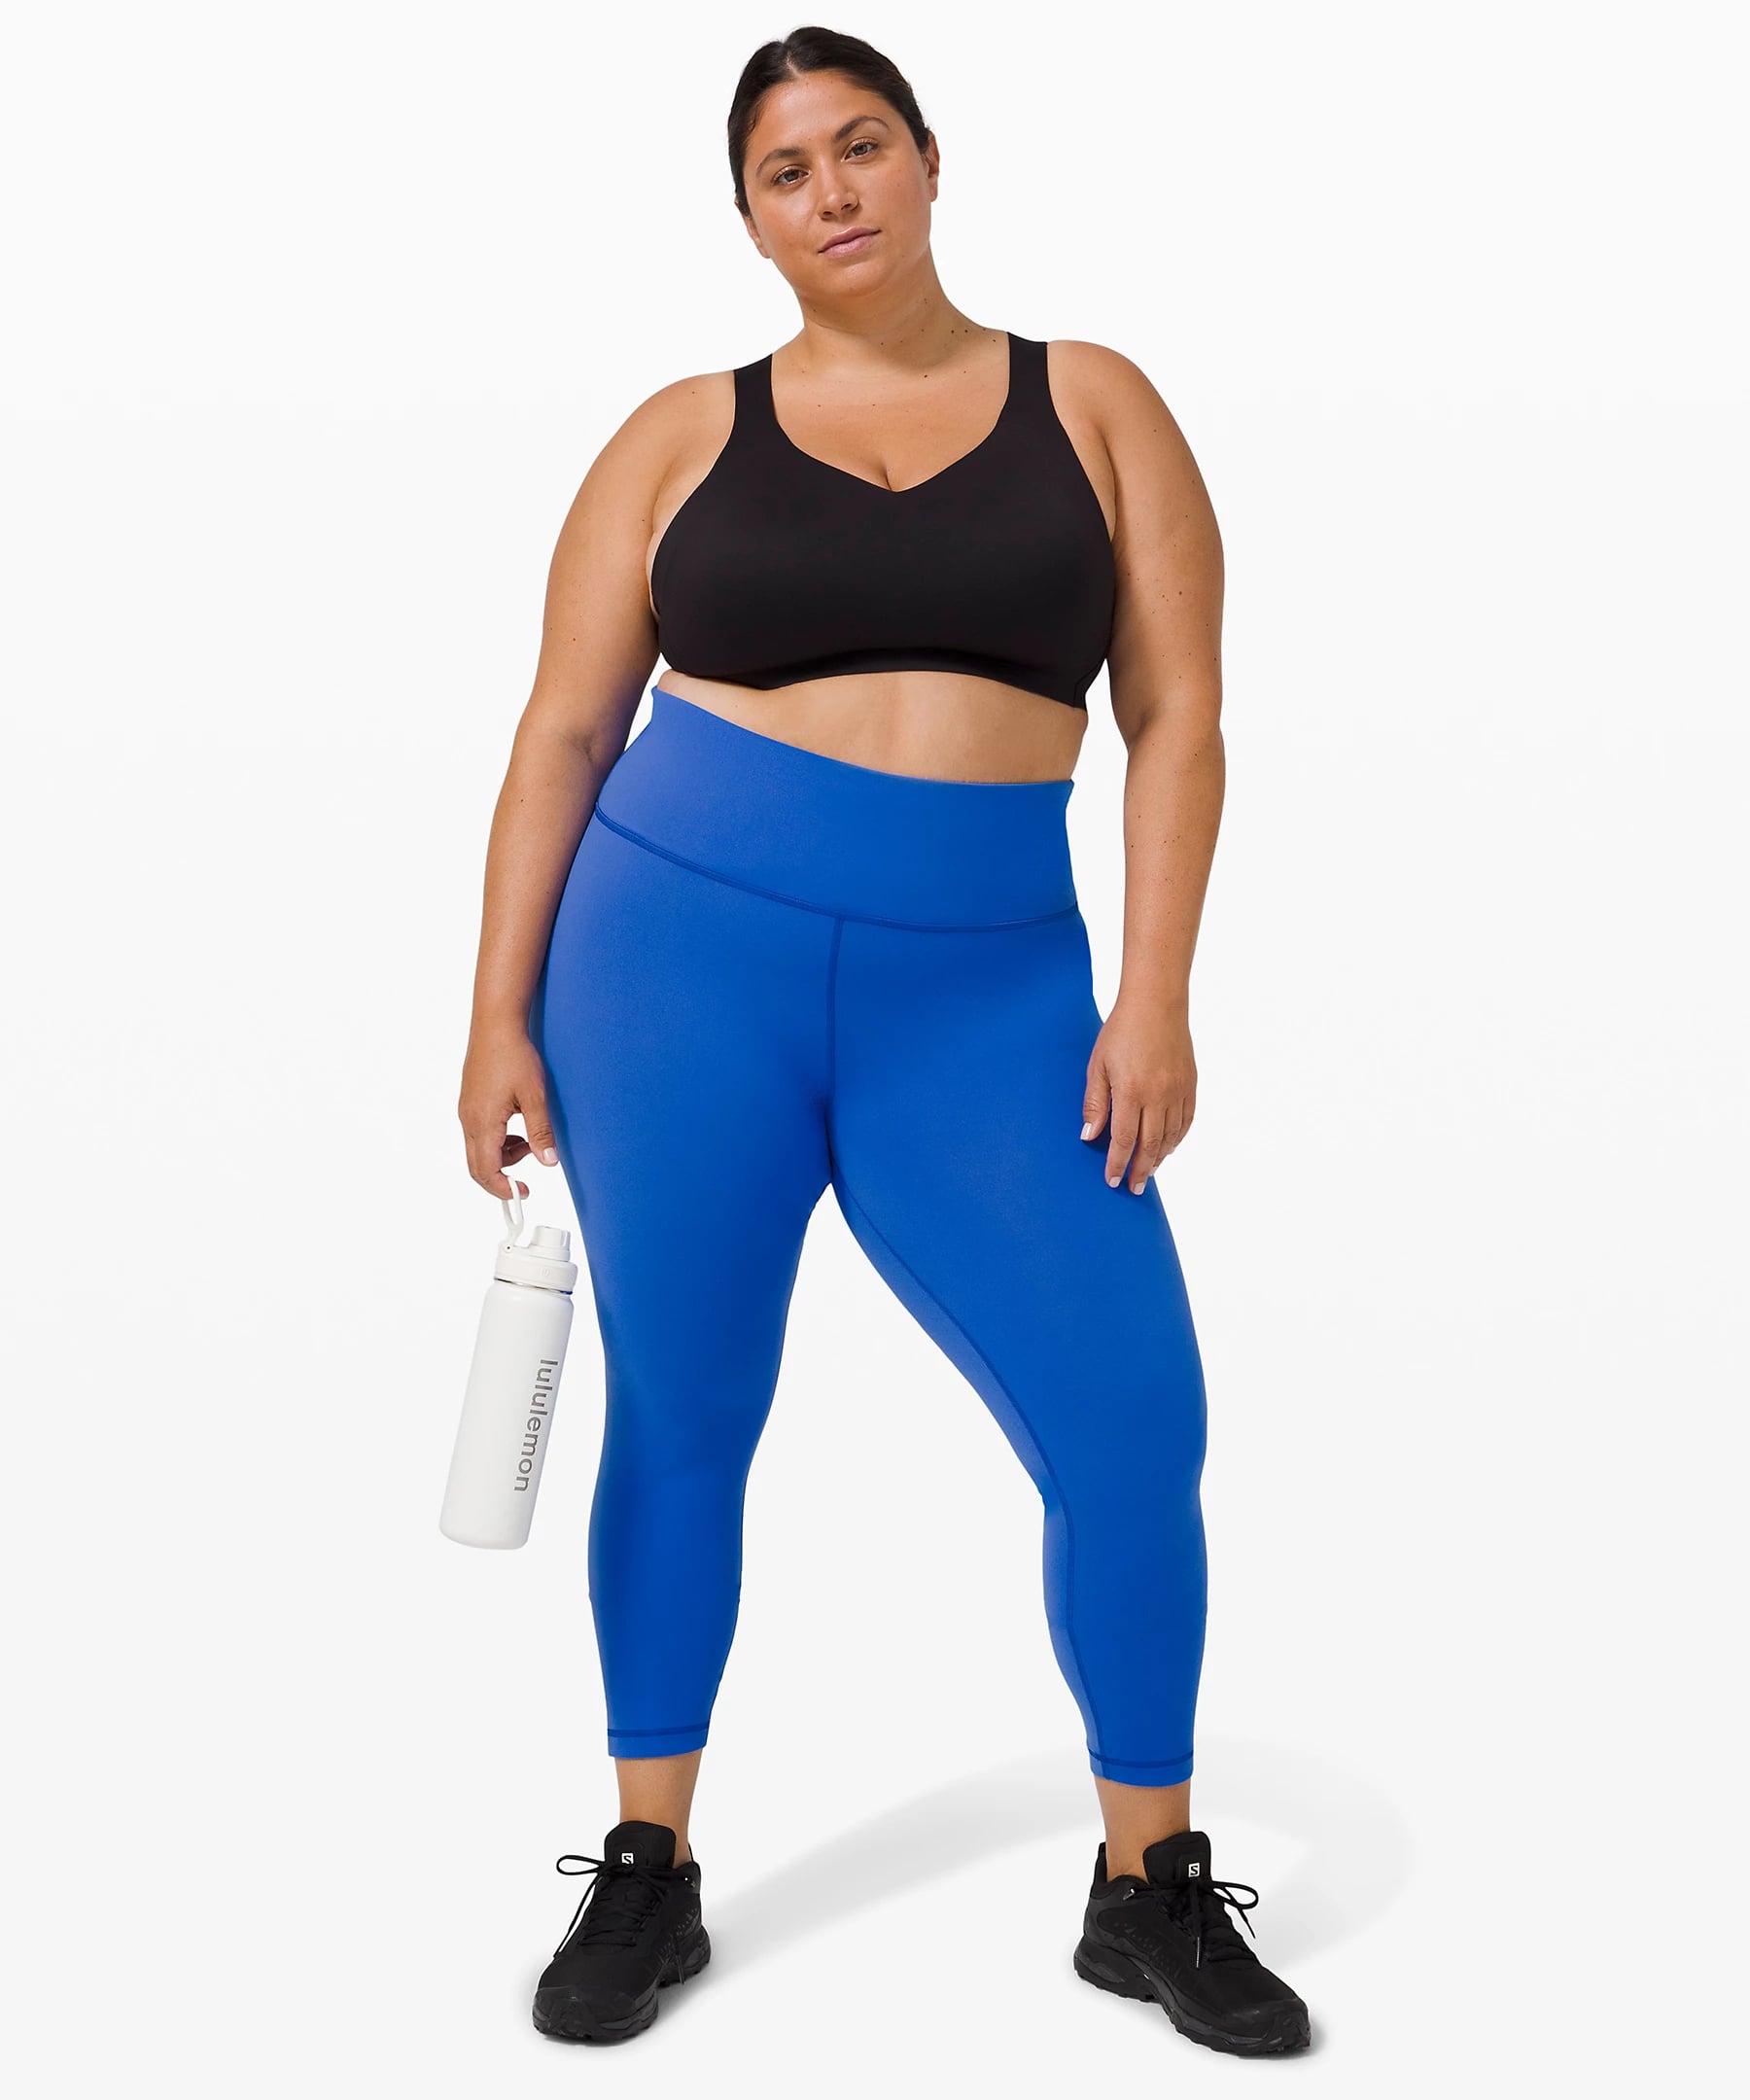 We Compared 13 of the Best Lululemon Leggings, So You Know Exactly What  You're Buying